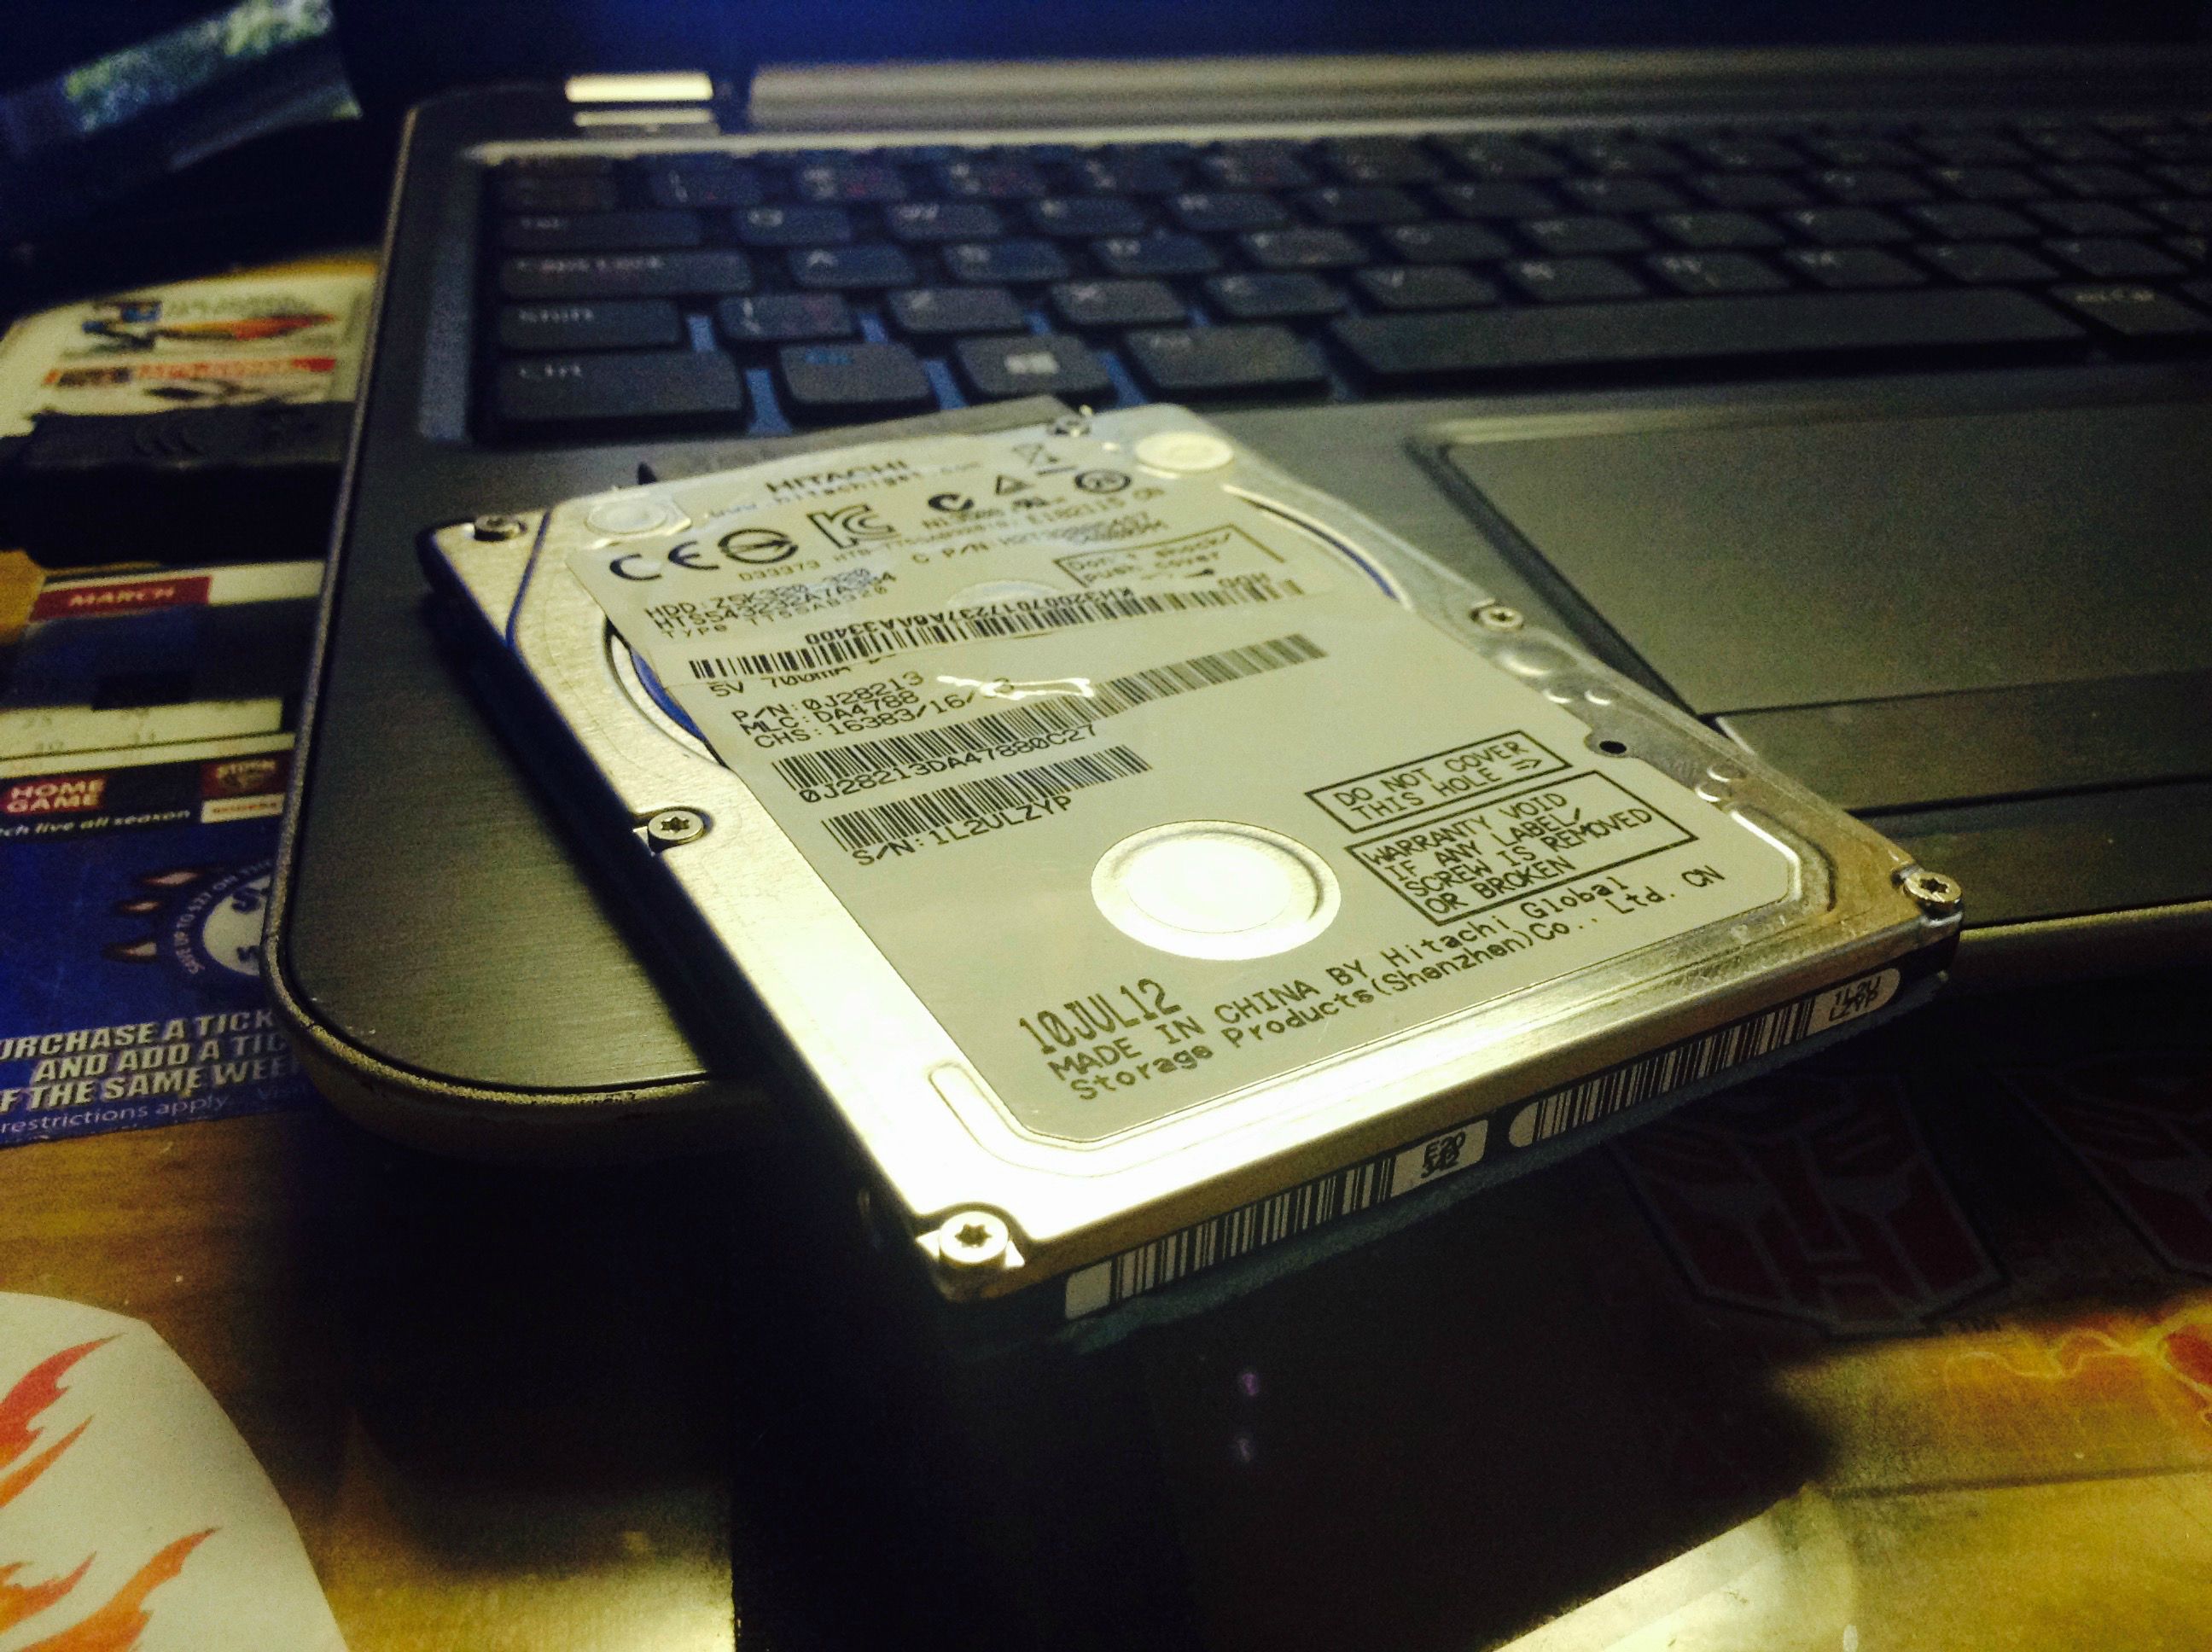 So a girl decide to turn this boring looking hard drive into something exciting.